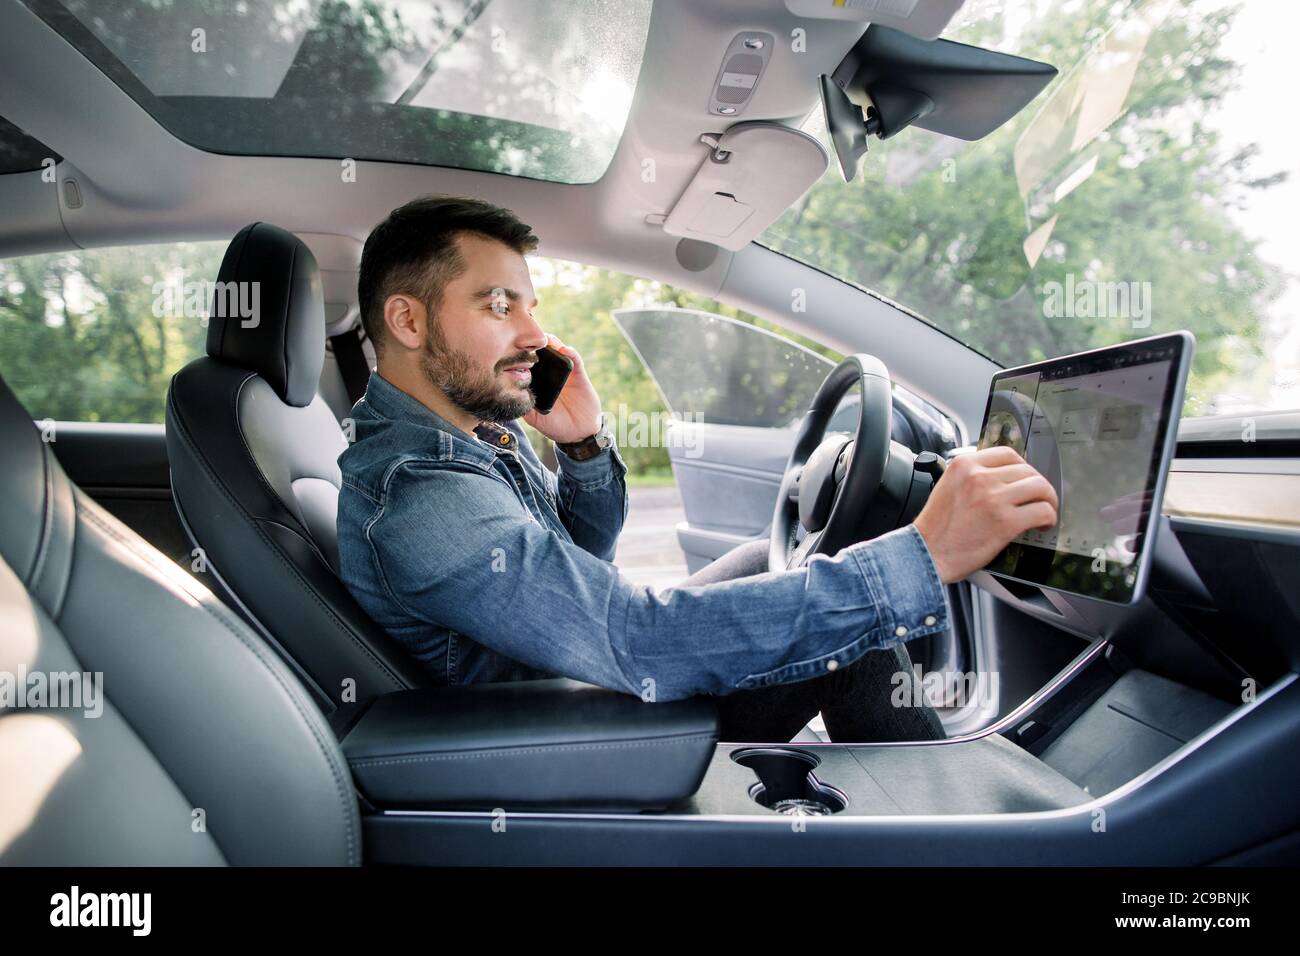 Testing a new electric futuristic car with self driving system. Side view of satisfied Caucasian man in casual jeans shirt sitting in modern car Stock Photo